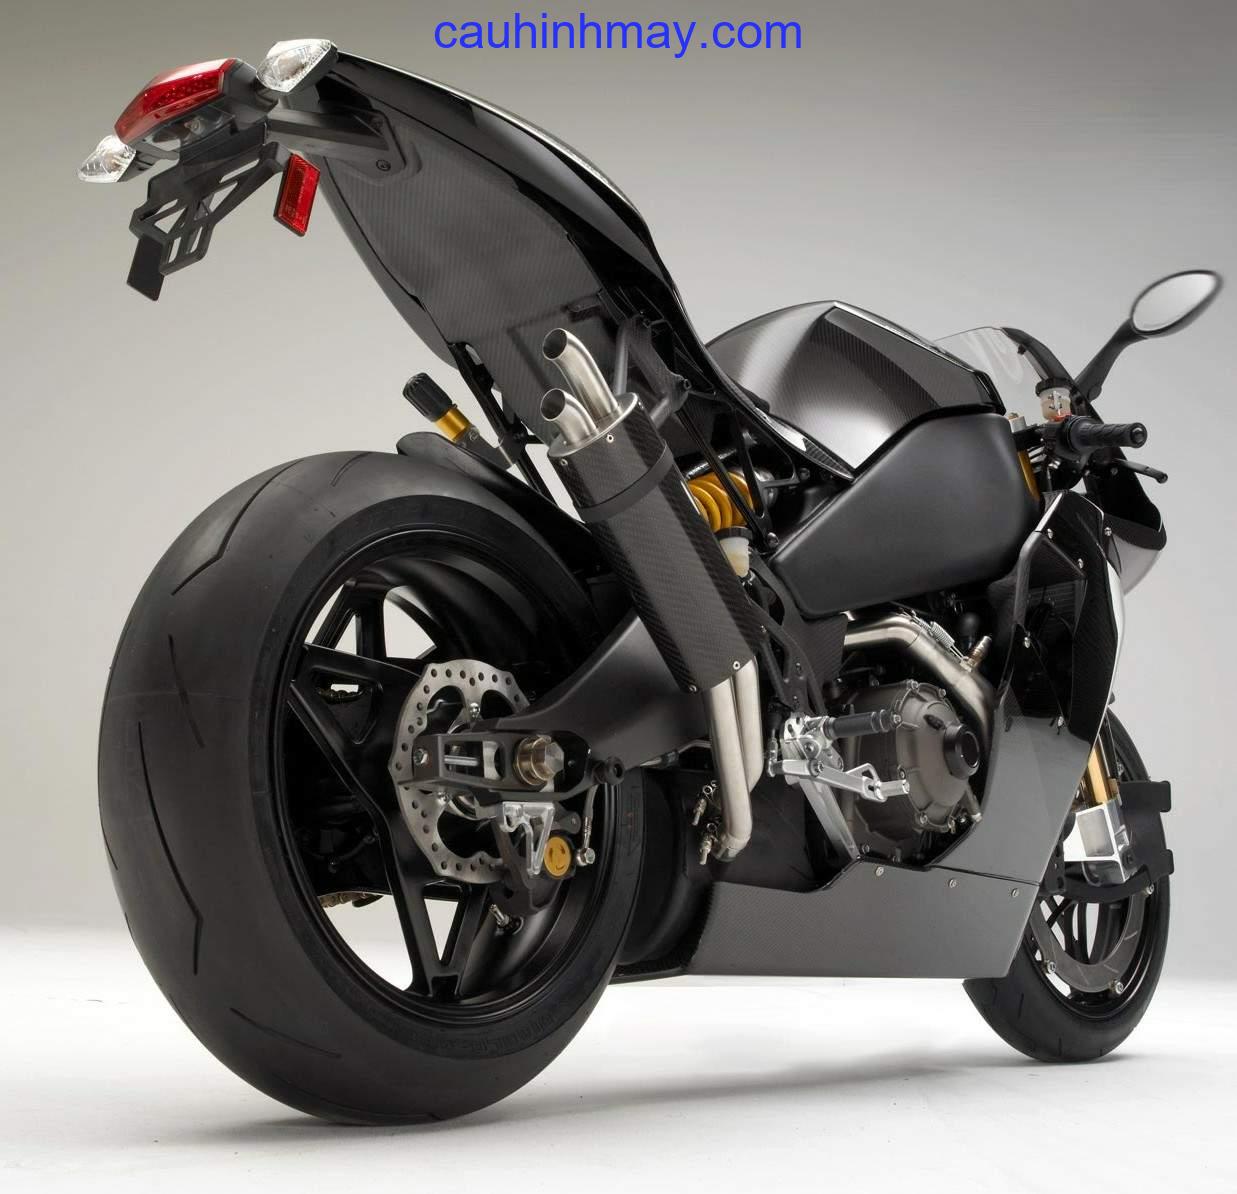 BUELL RACING 1190RS - cauhinhmay.com